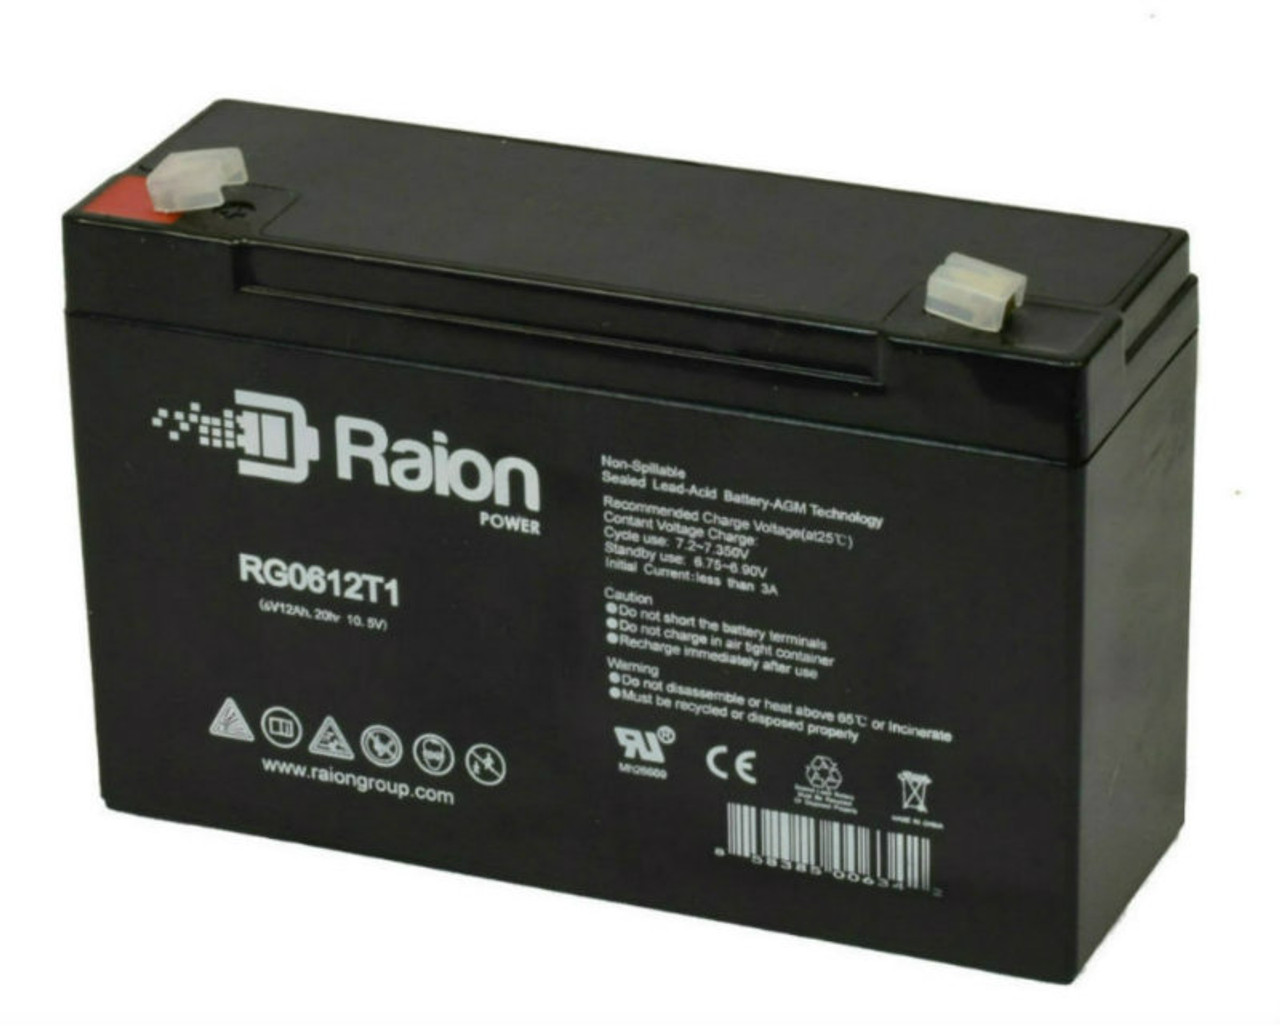 Raion Power RG06120T1 Replacement 6V 12Ah Emergency Light Battery for Sure-Lites UNH